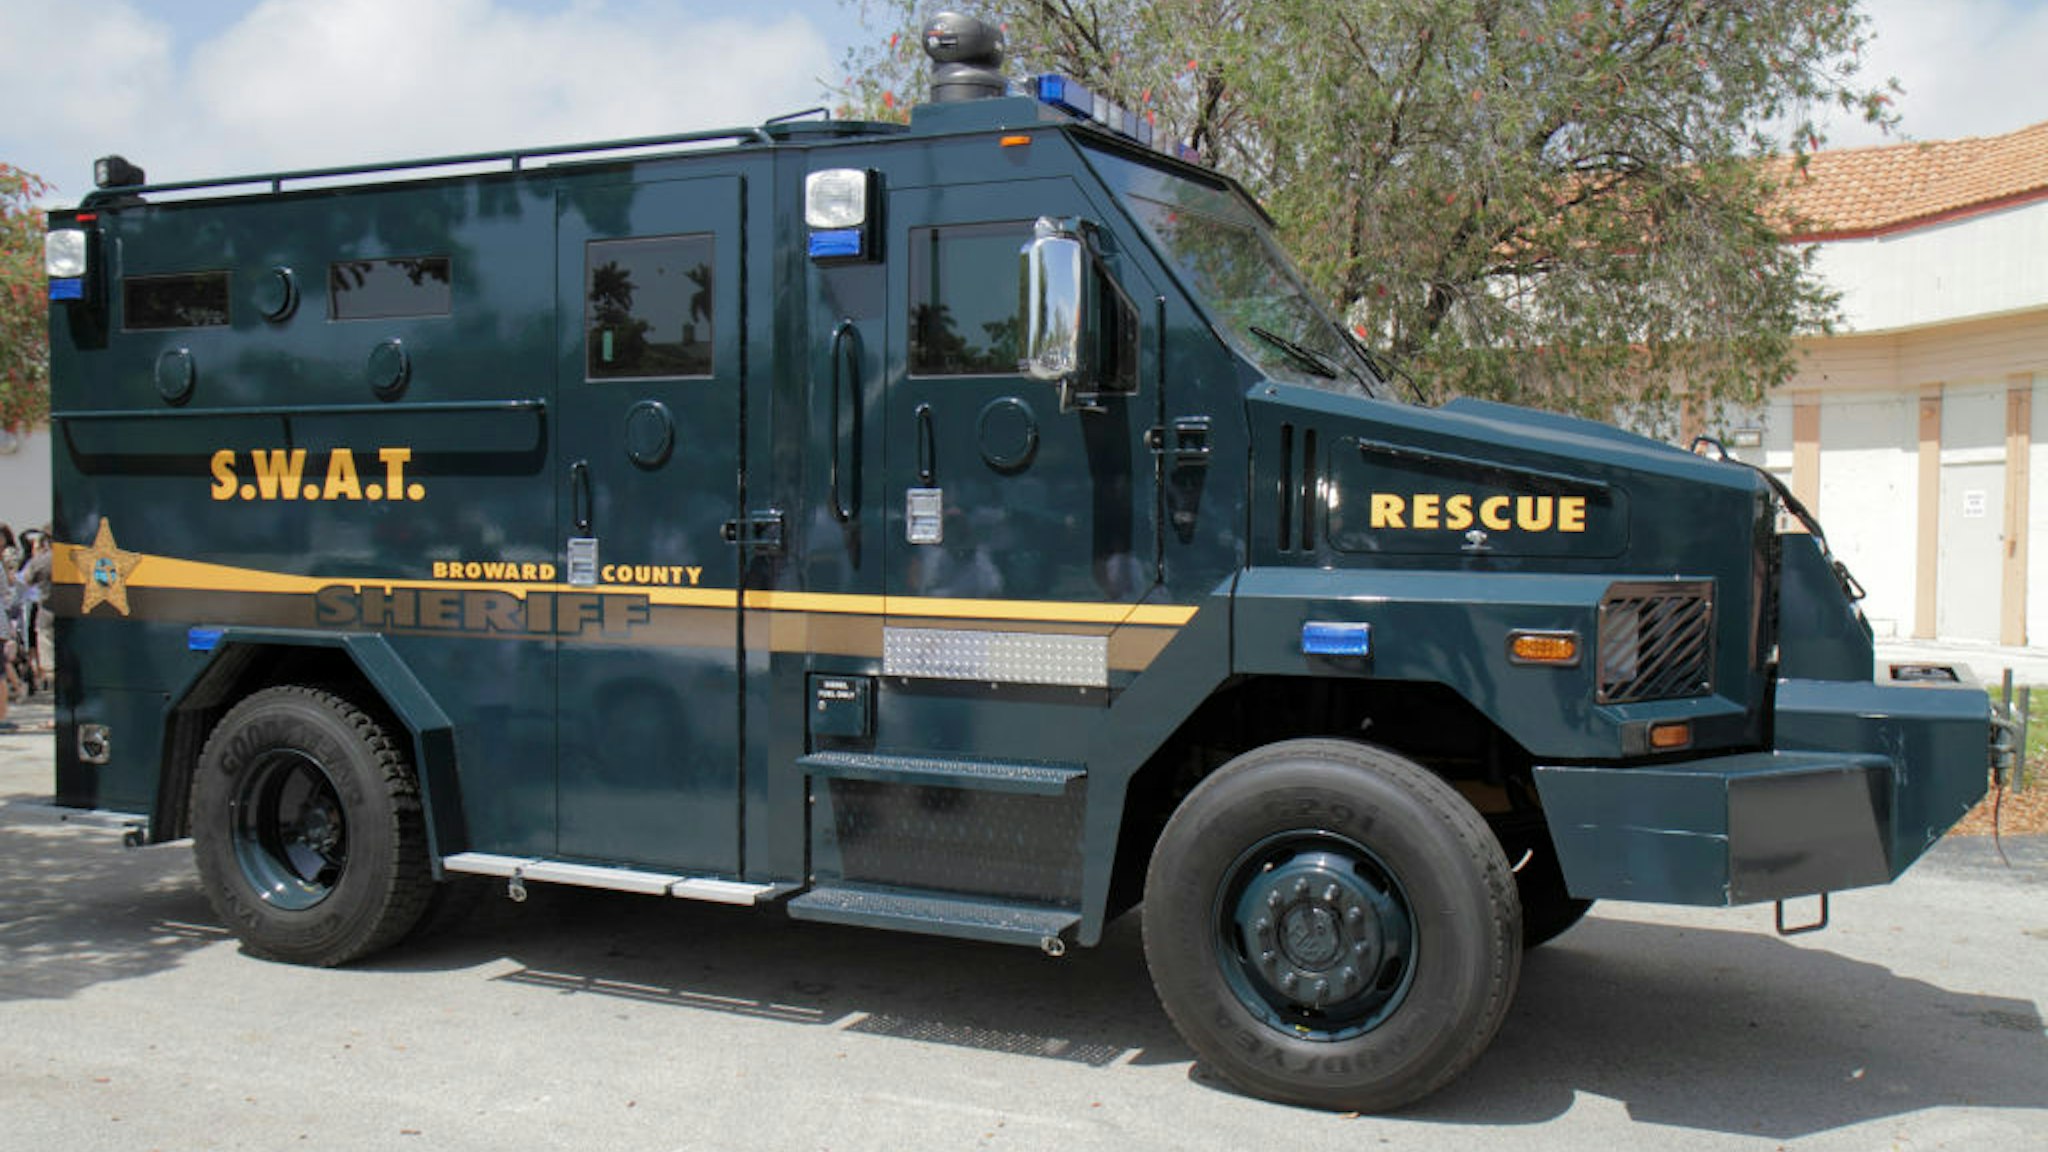 A SWAT rescue police truck.